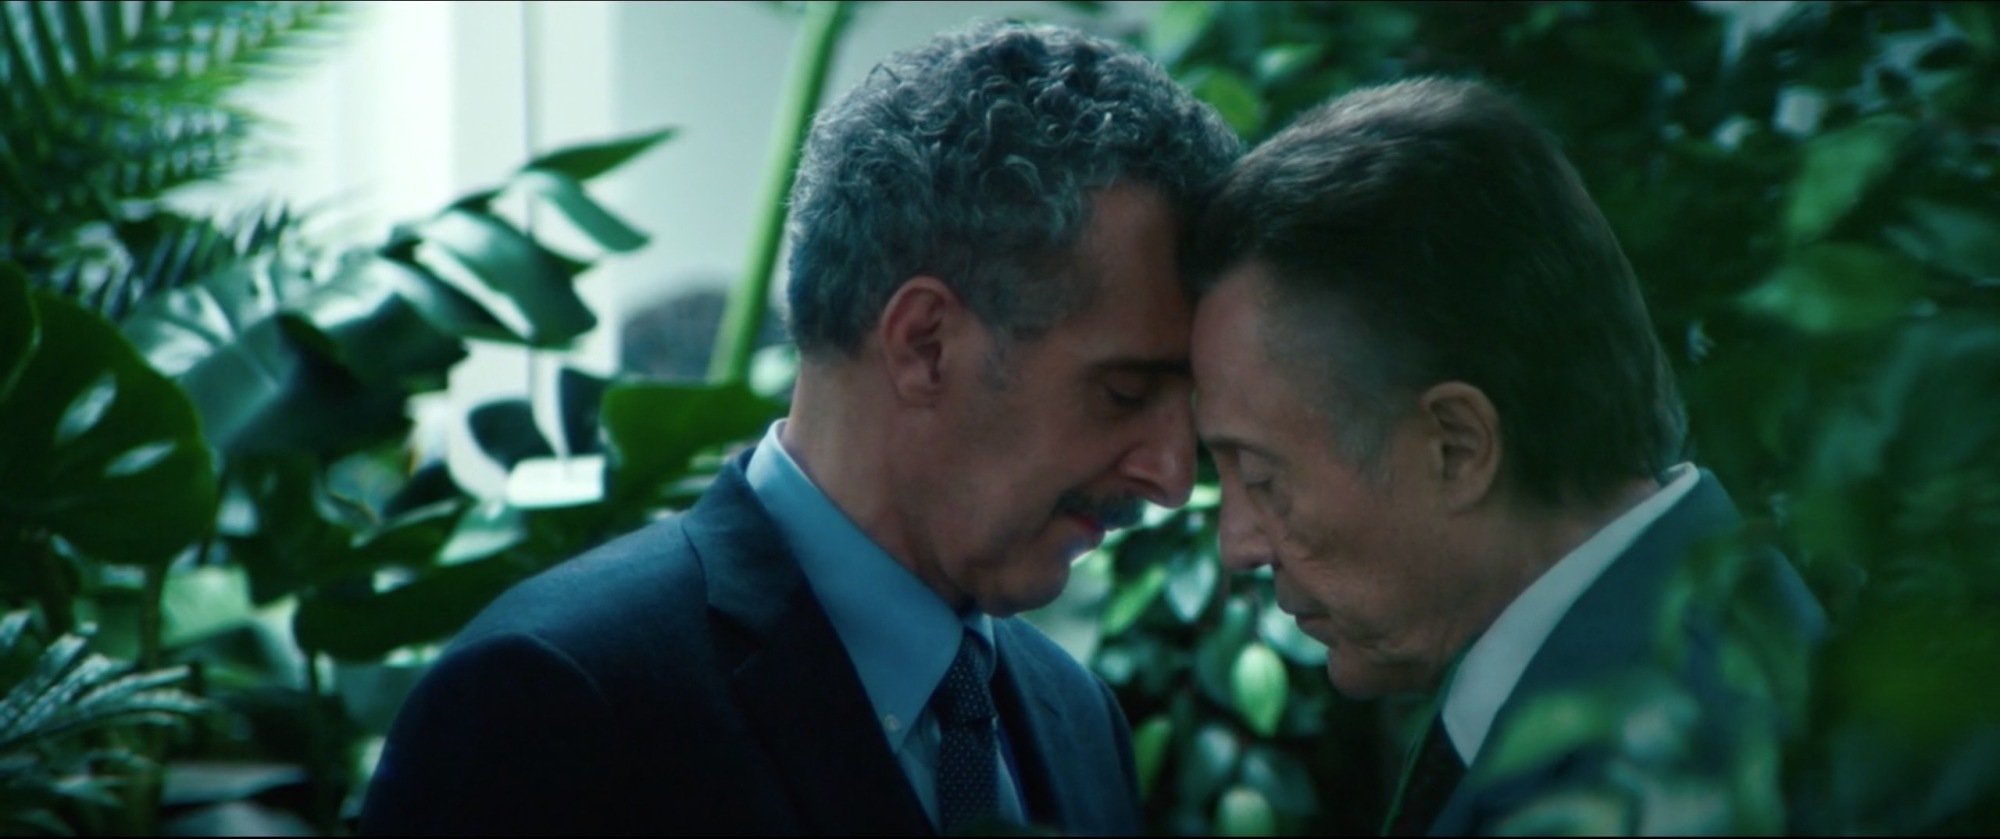 Two men standing forehead to forehead in a room surrounded by plants.